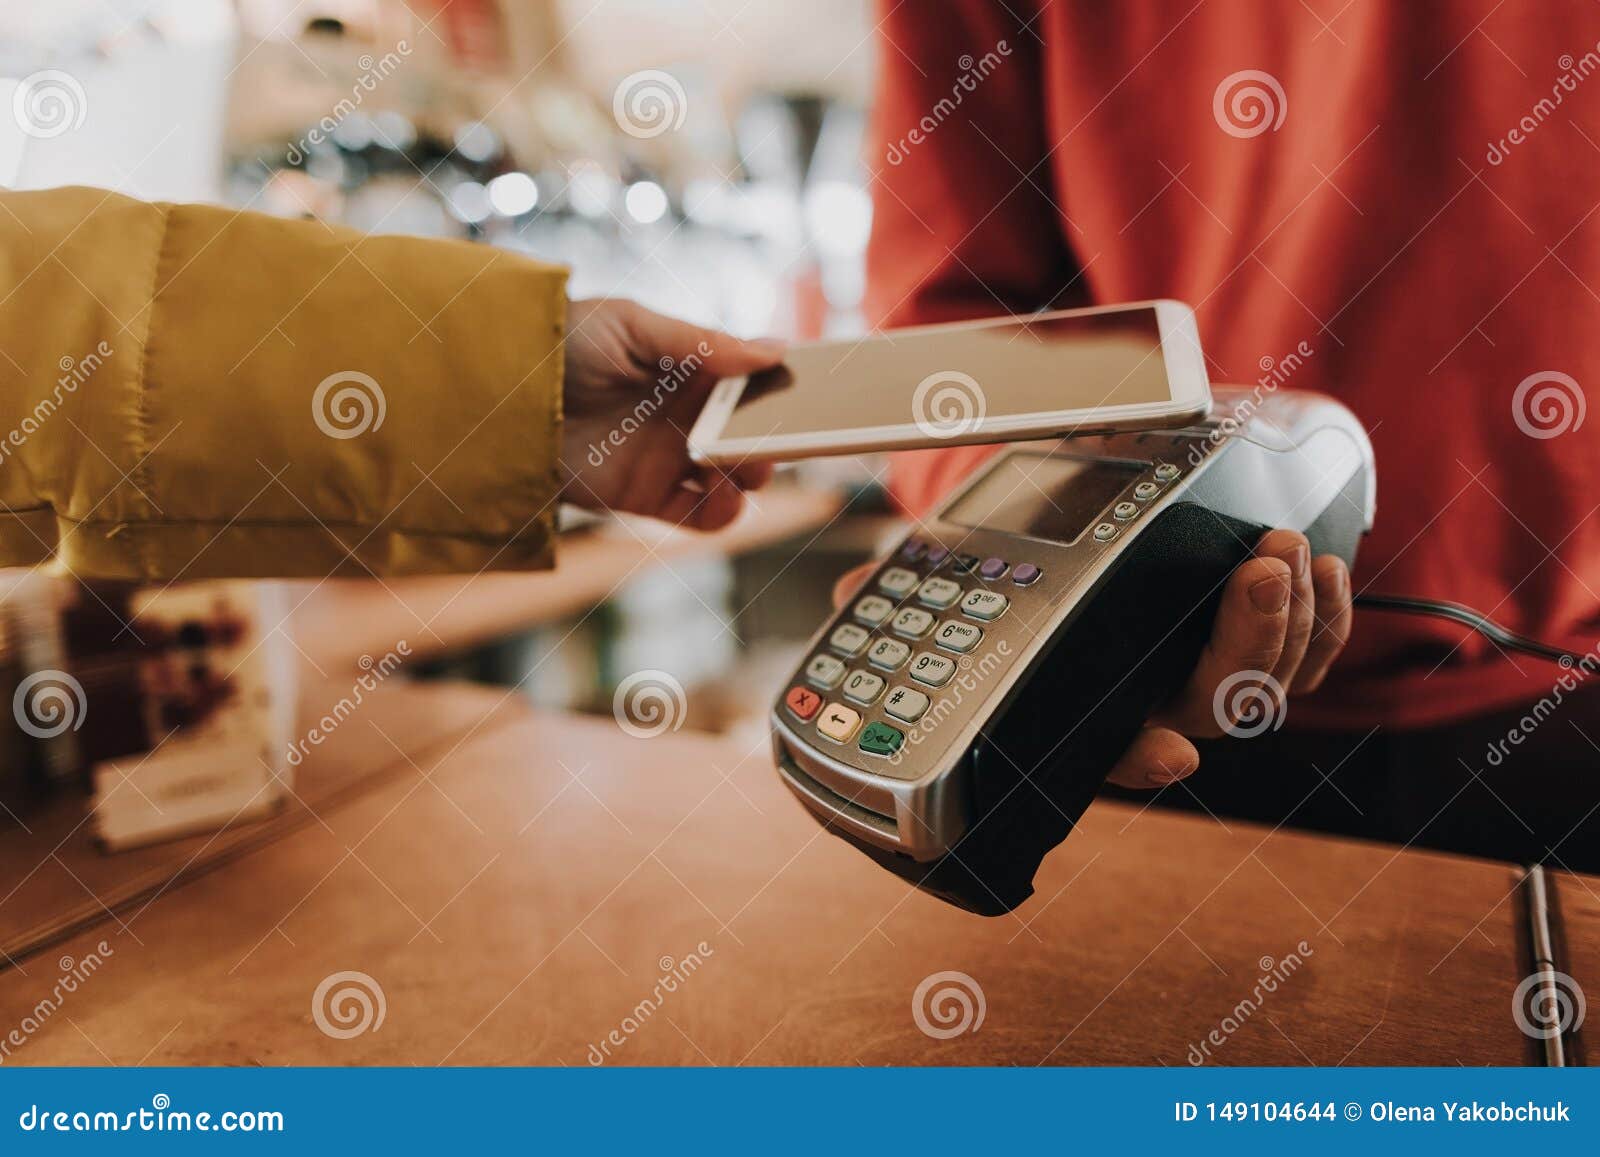 young lady pay bill via contactless payments